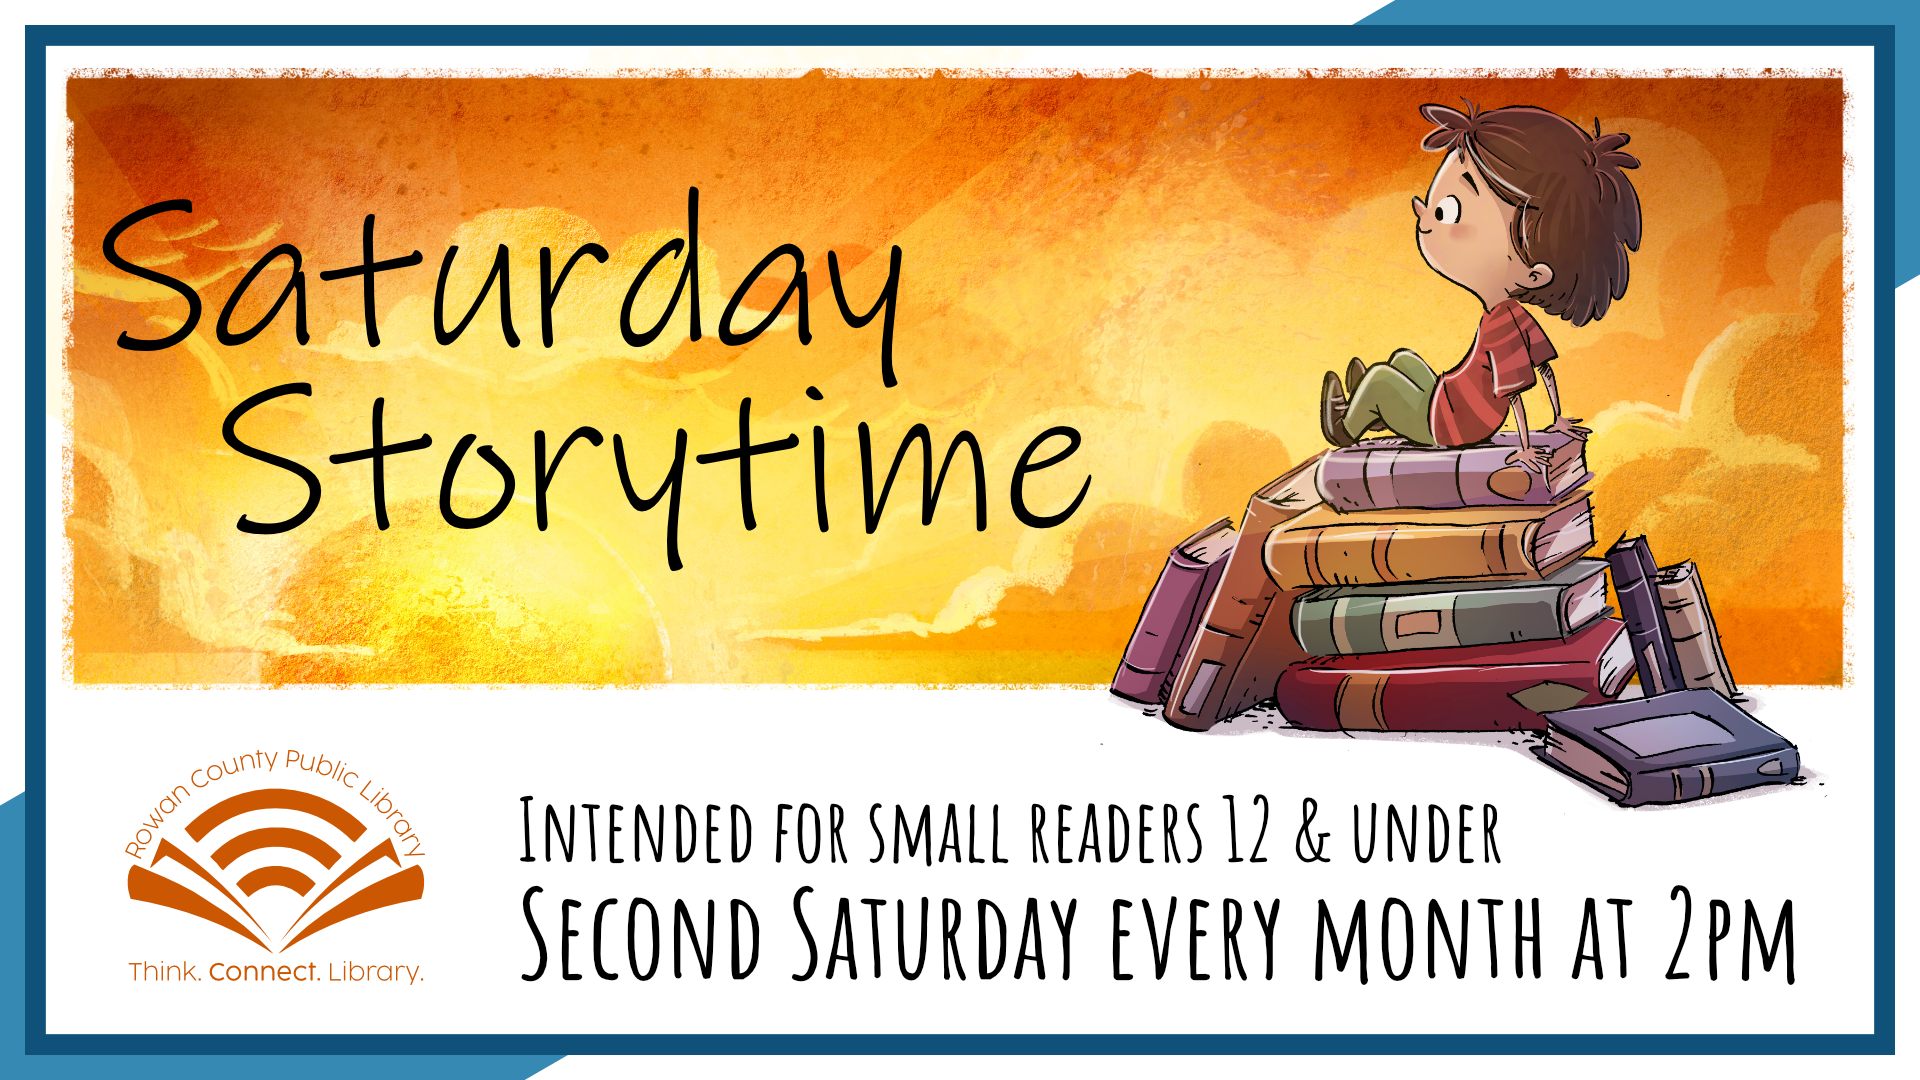 Saturday Storytime, second Saturday monthly at 2pm, intended for ages 12 & under